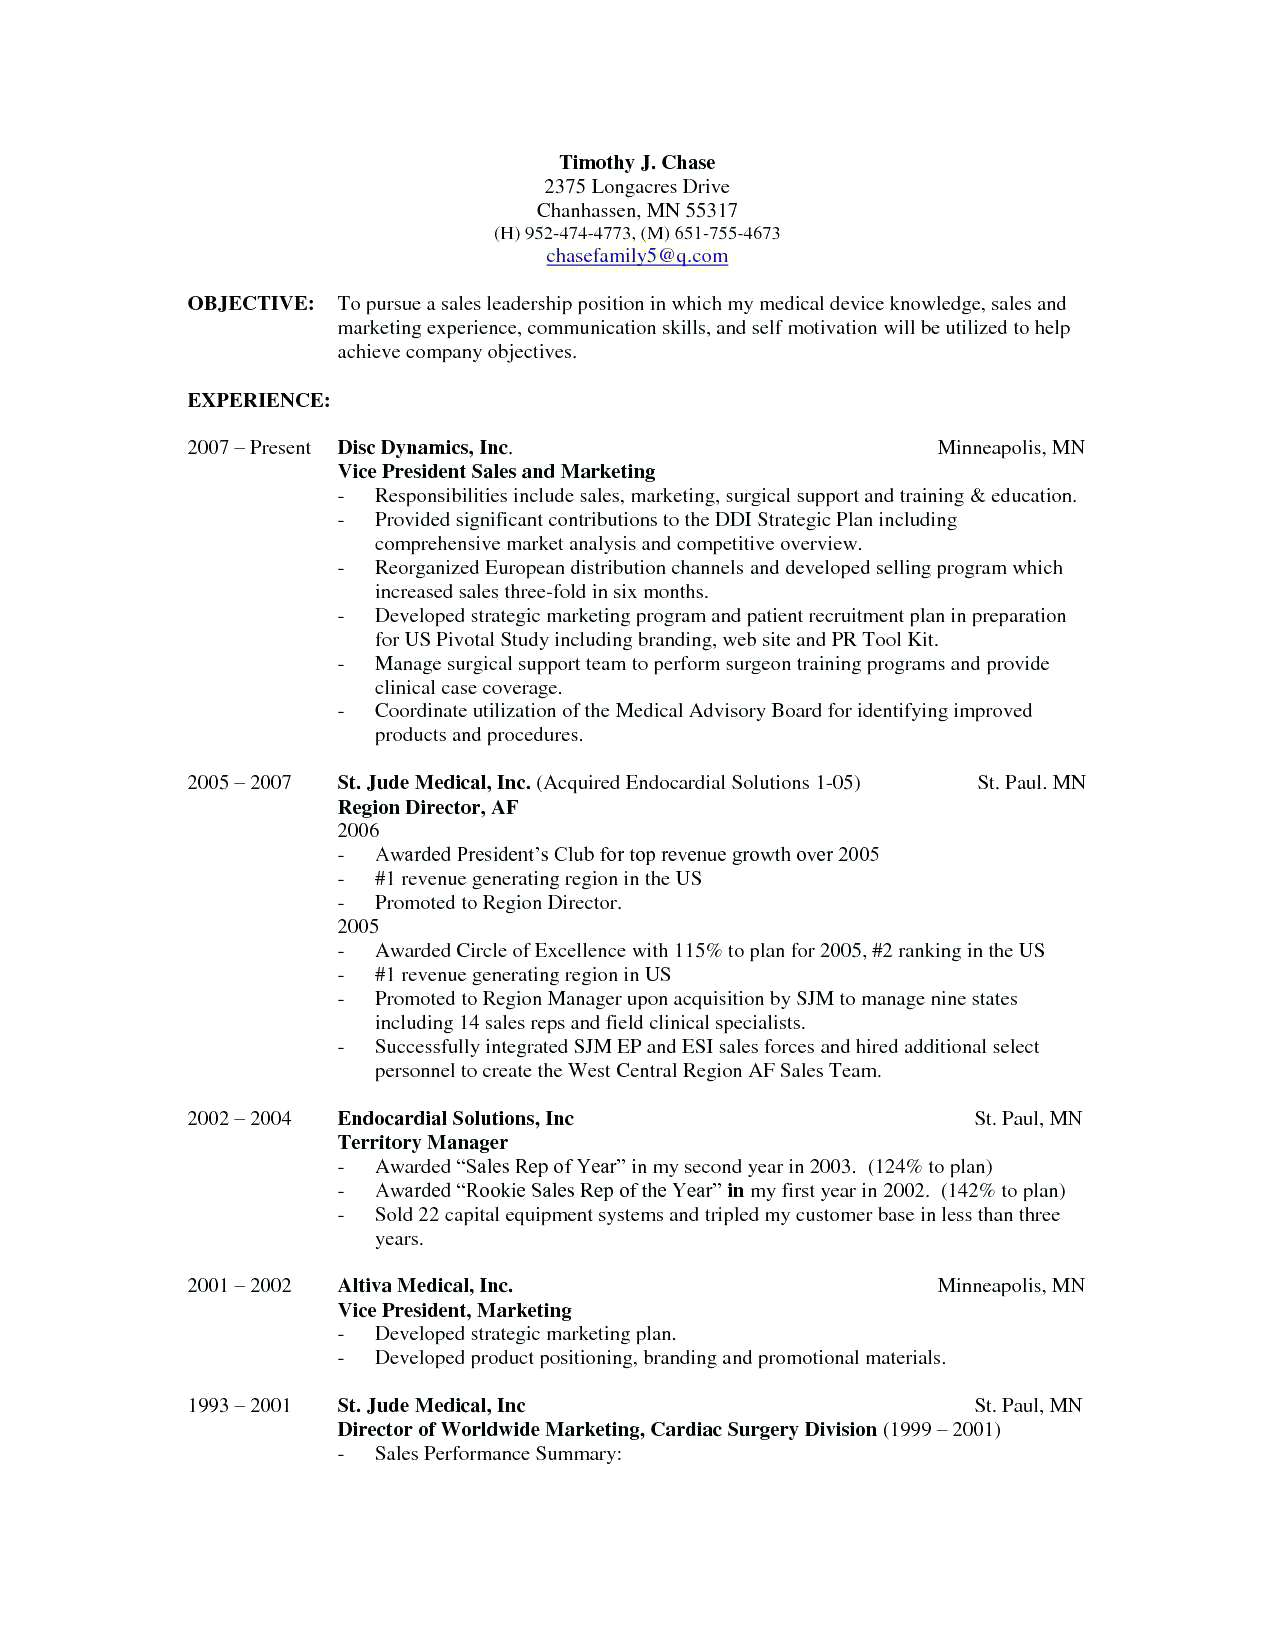 Resume Tips Objective Medical Device Sales Resume Tips Ooxxooco